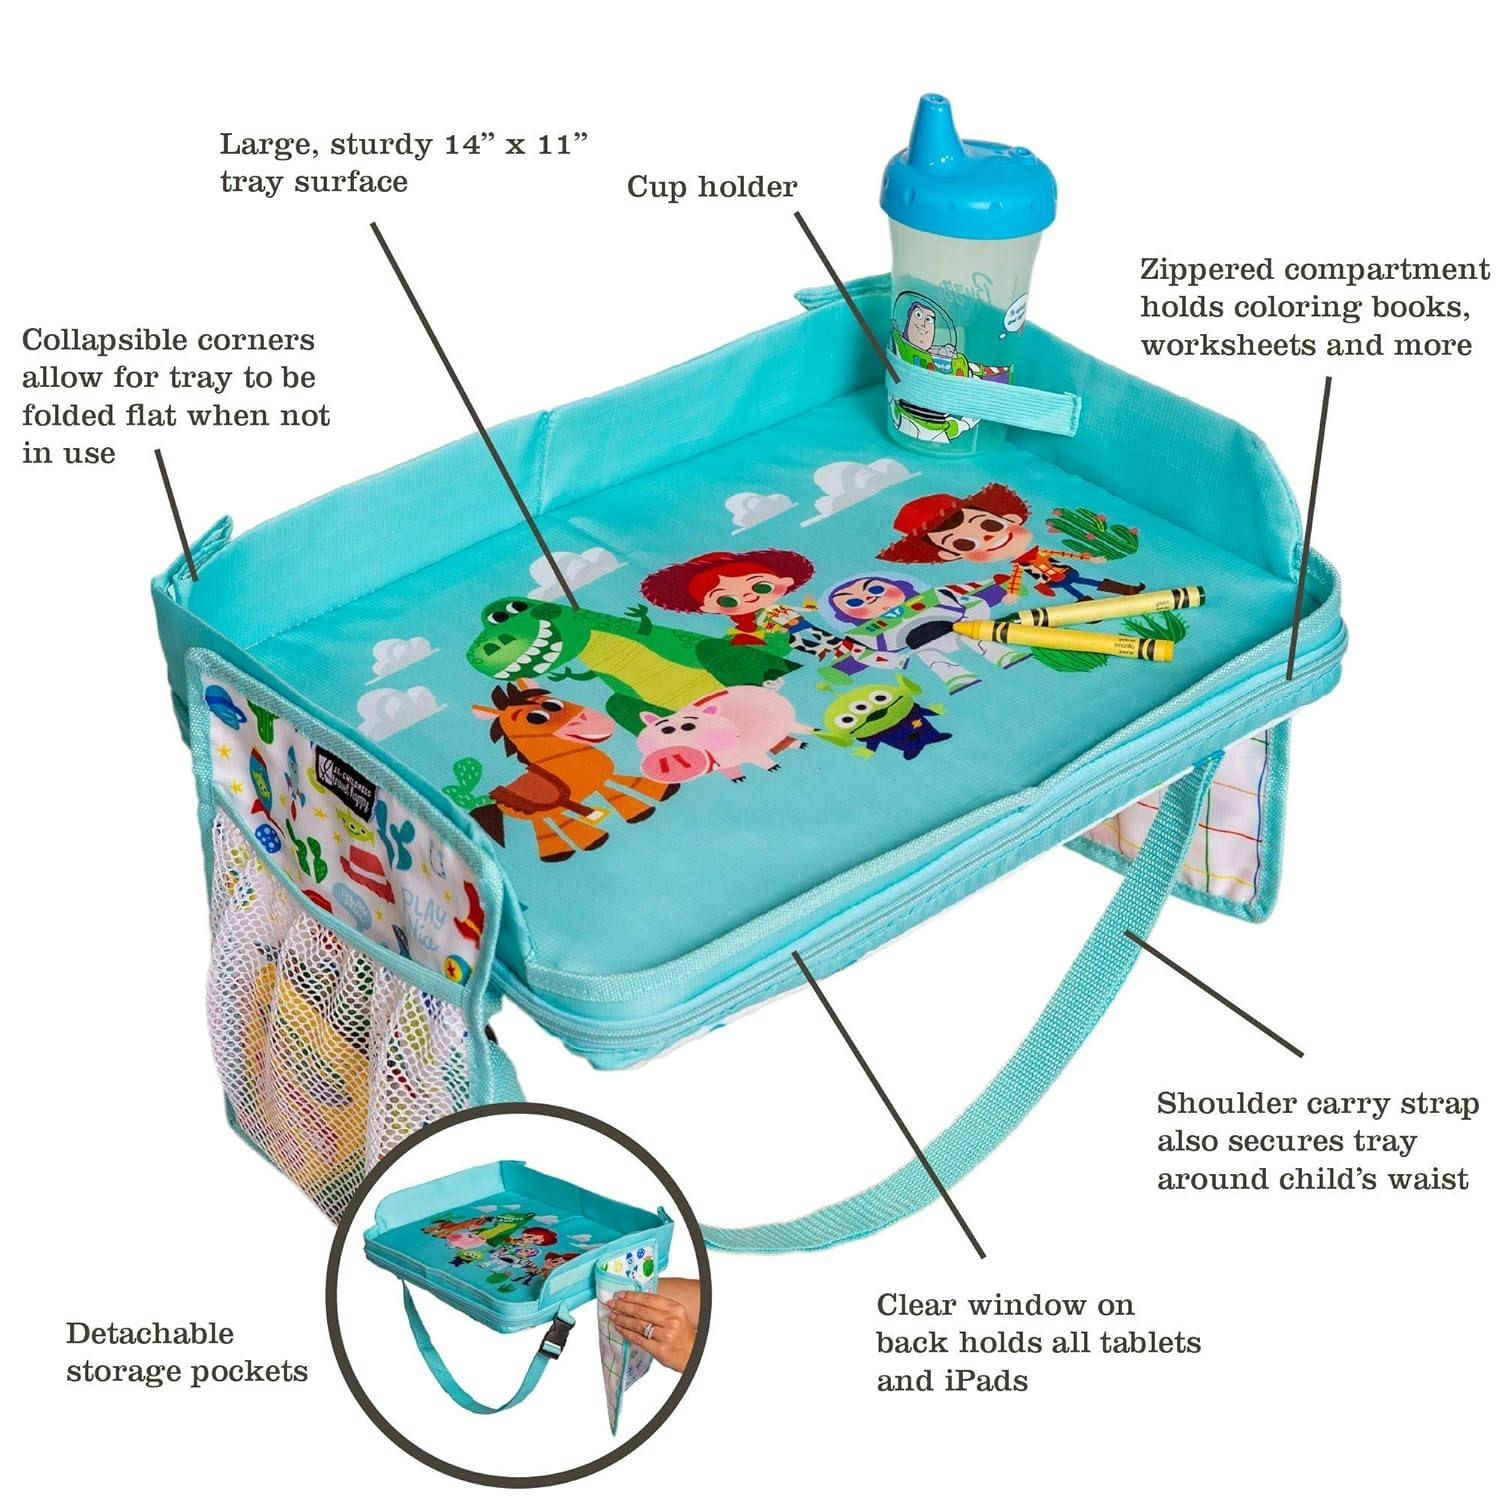 Toy Story Adventure Kids' Travel Tray & Tablet Holder